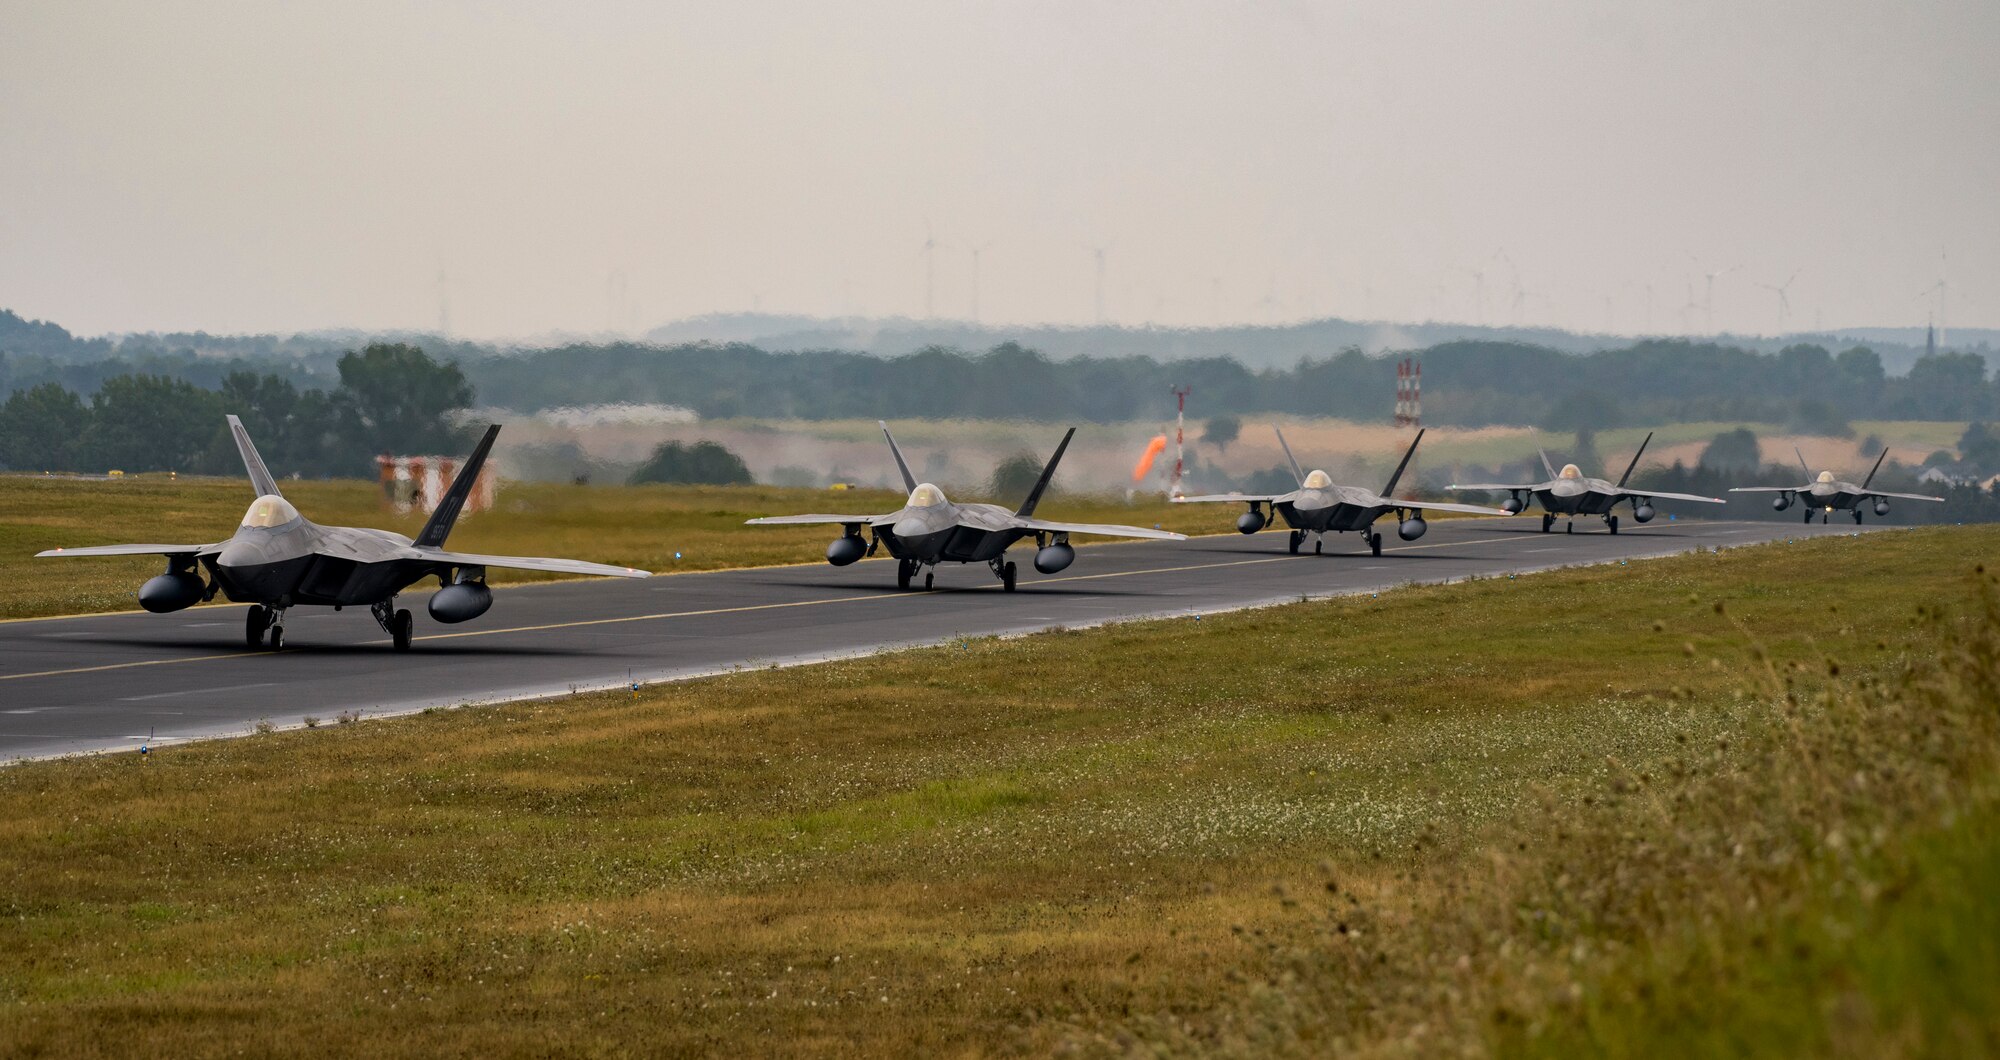 Raptors touch down at Spangdahlem